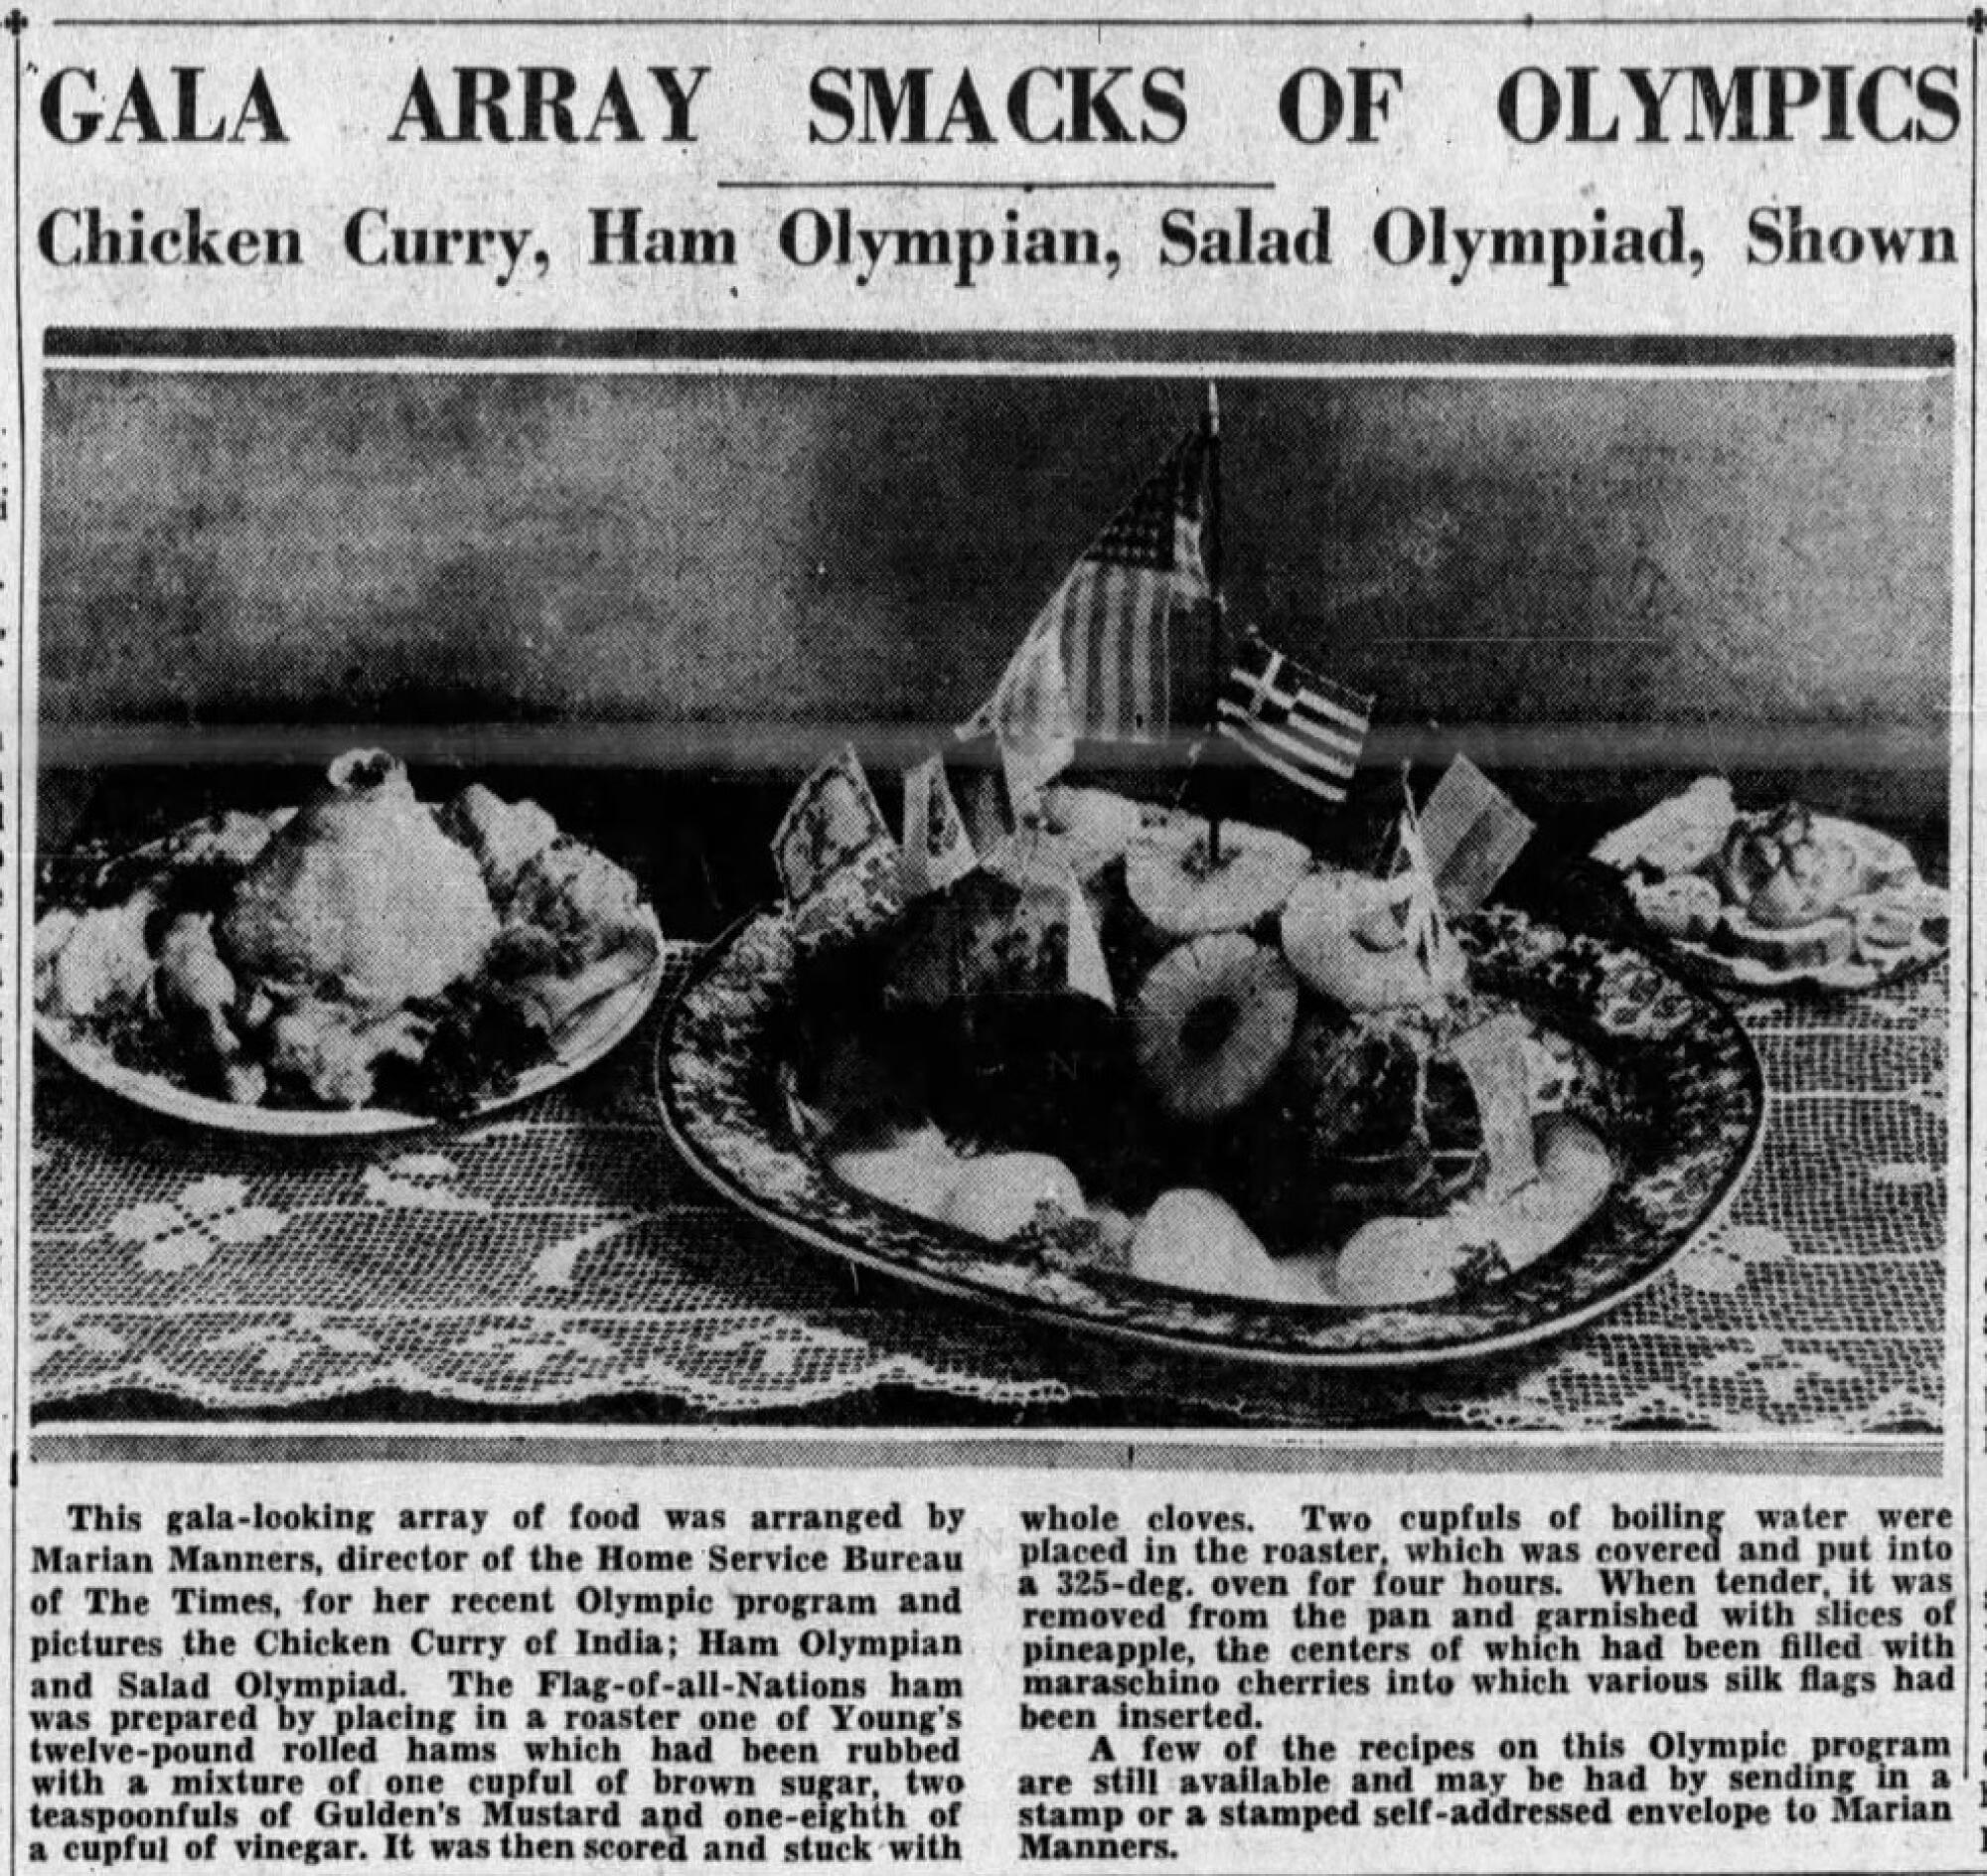 August 1932 newspaper clipping: Gala Array Smacks of Olympics